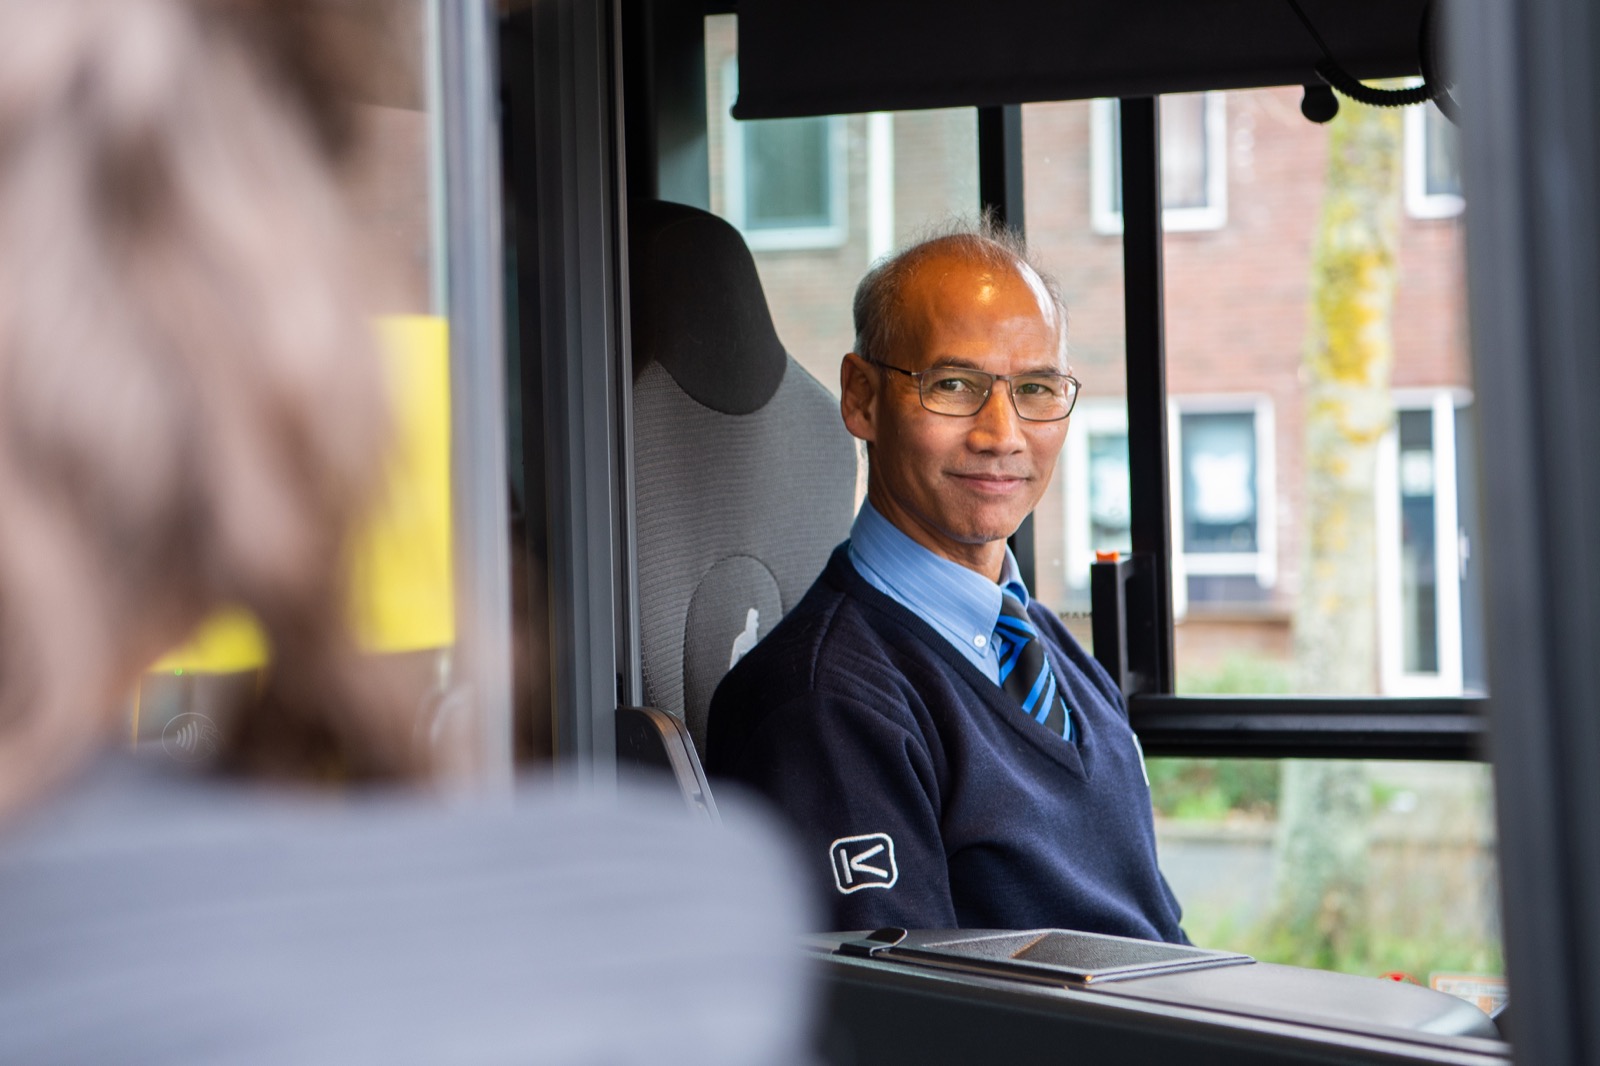 Do you want to become a busdriver?